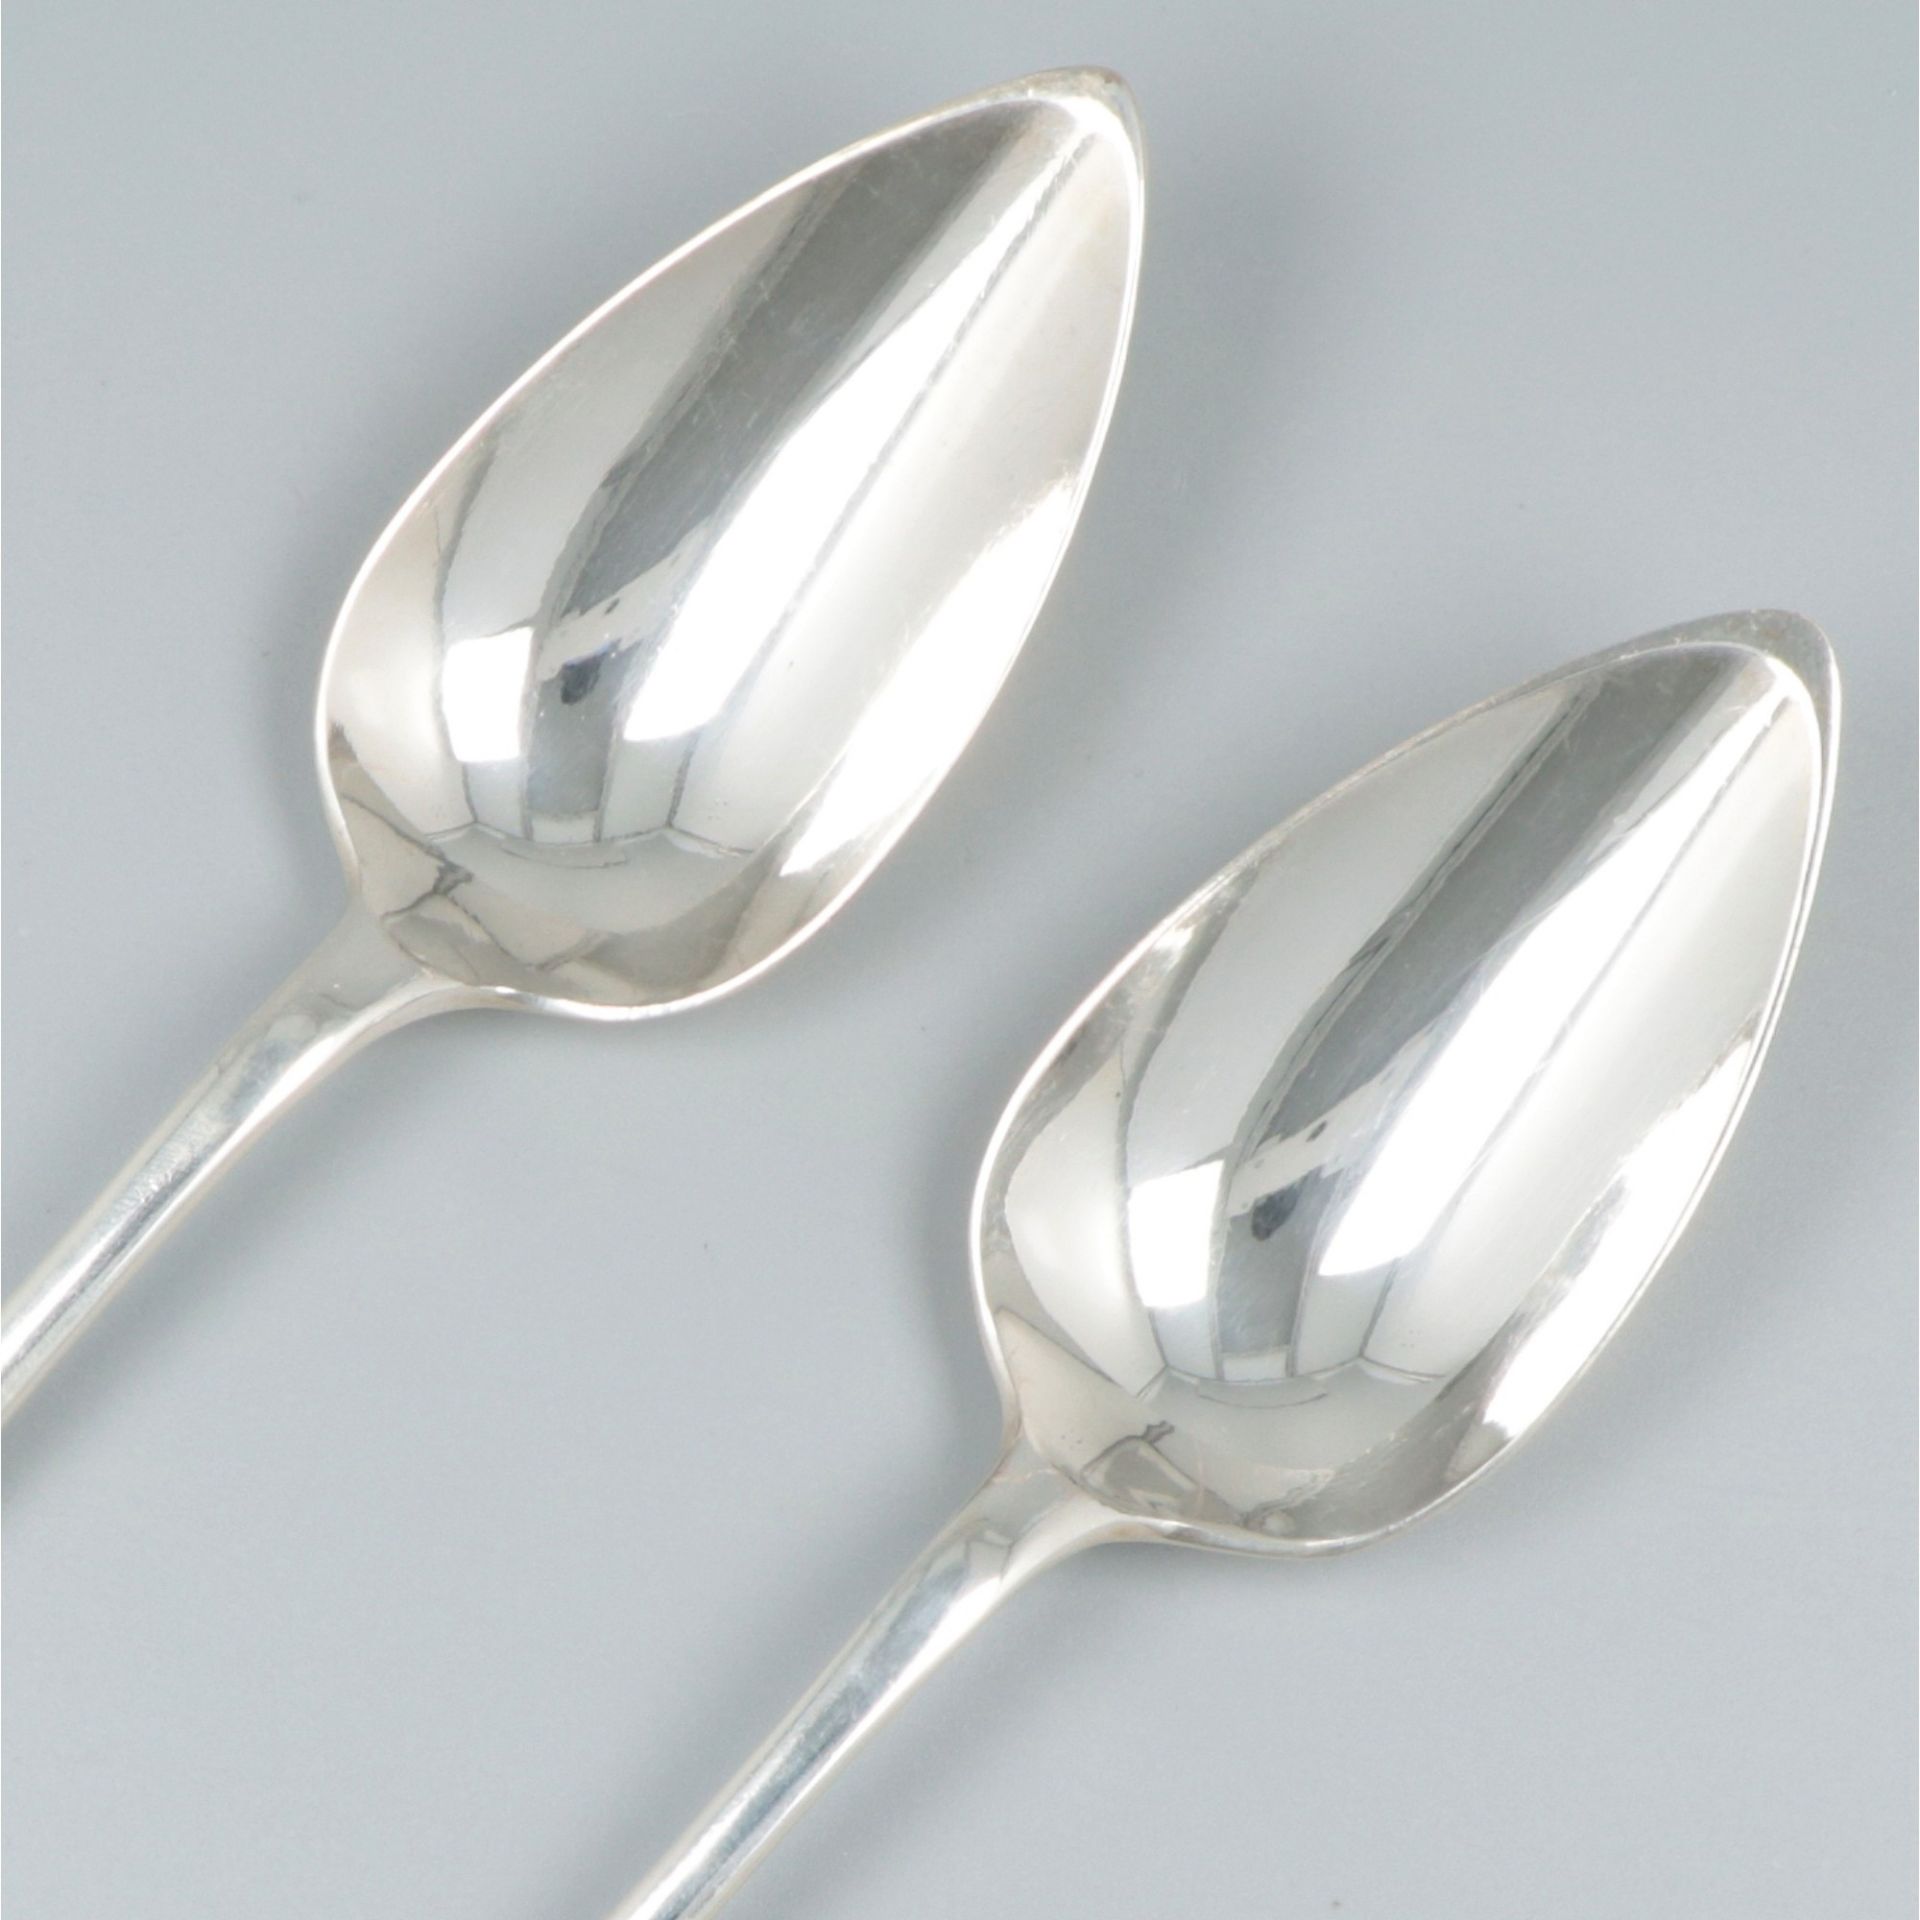 6-piece set dinner spoons "Haags Lofje", silver. - Image 5 of 6